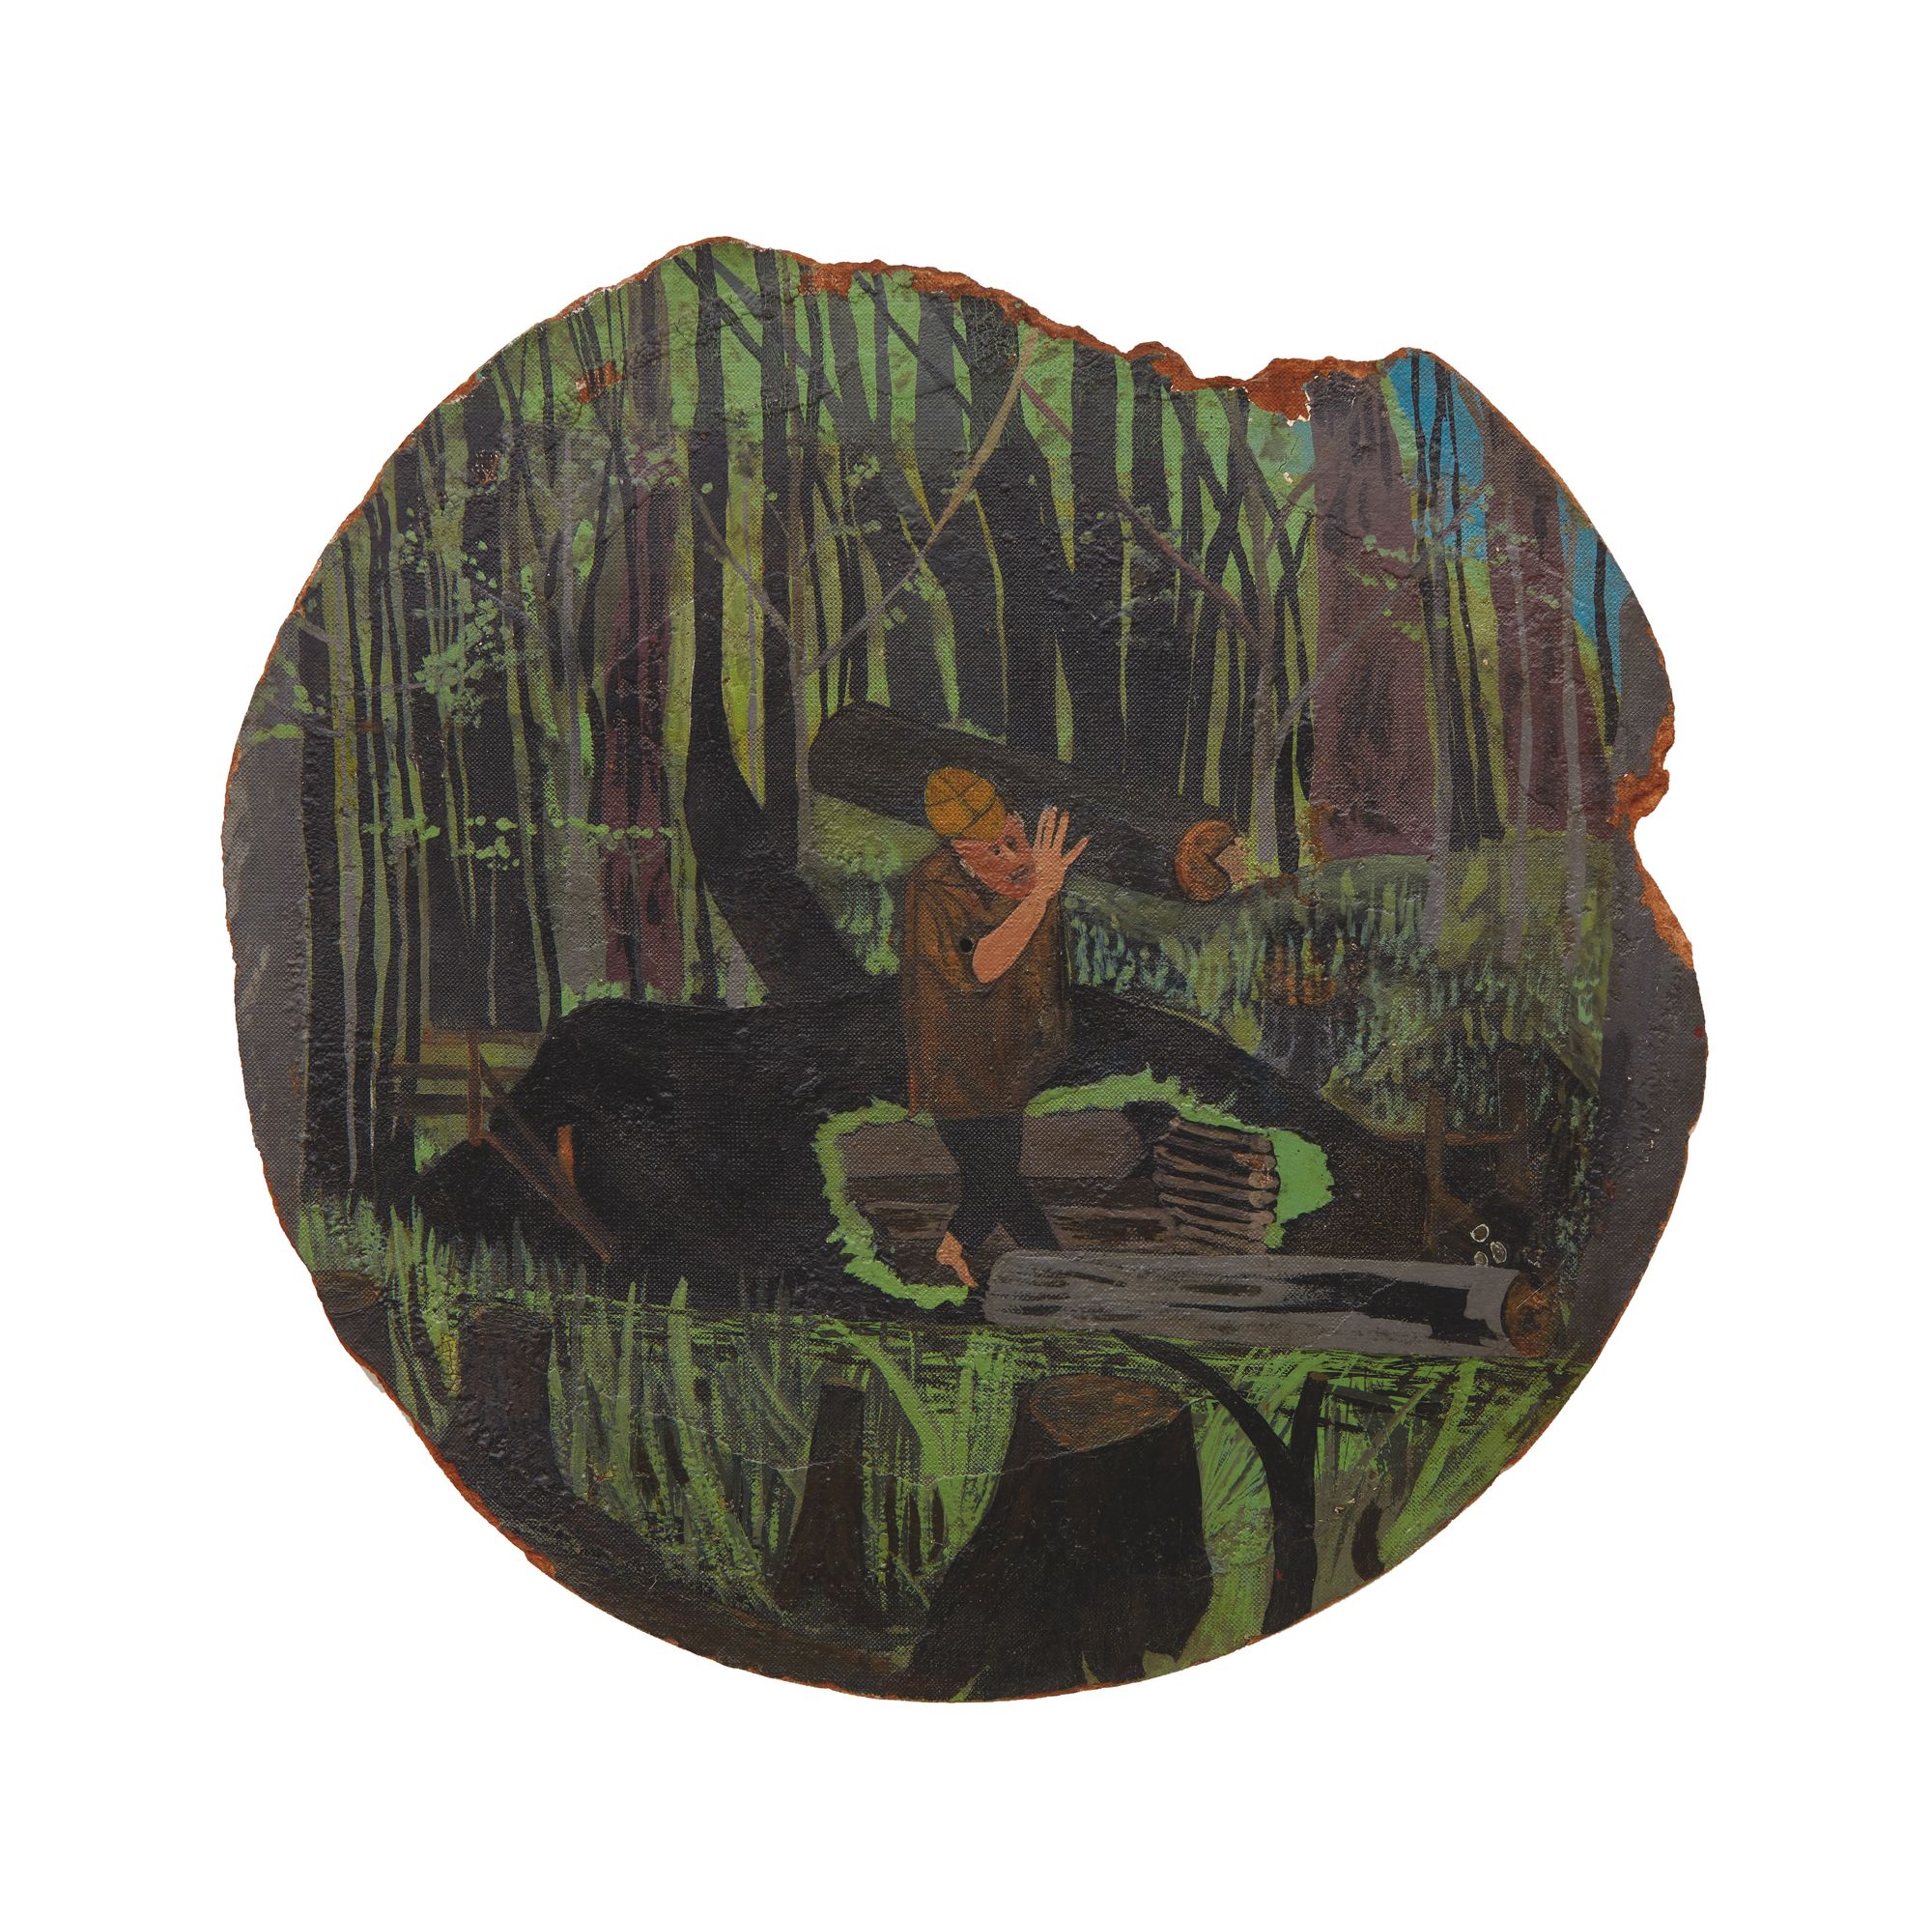 A partially damaged painting of a man carrying logs in the forest, framed on a circular, partially damaged canvas.